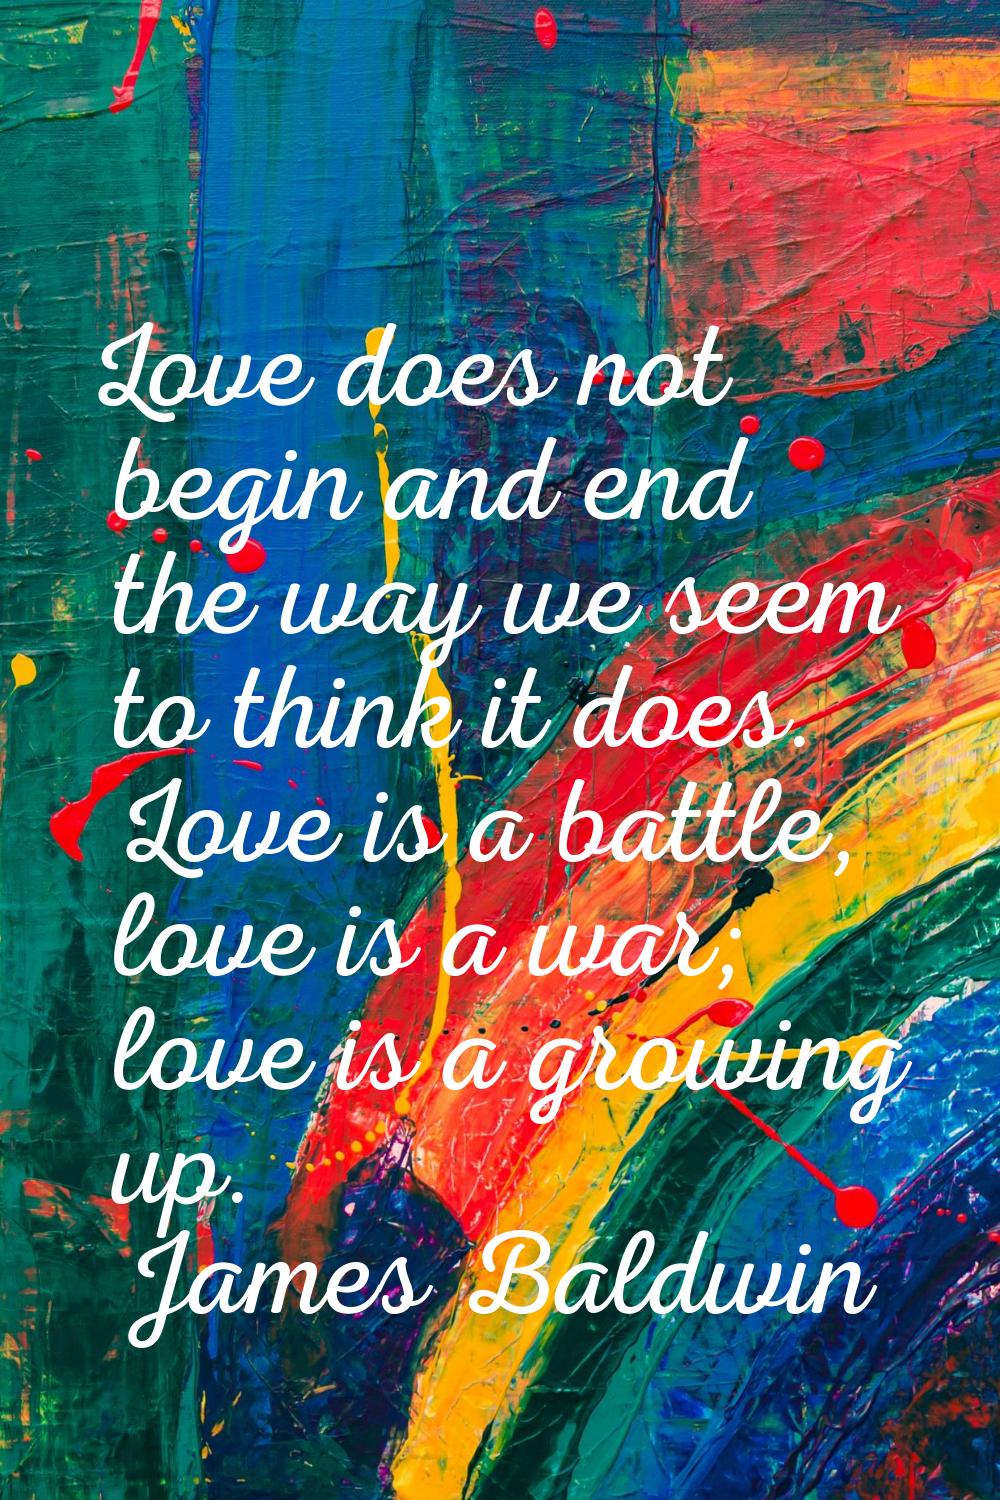 Love does not begin and end the way we seem to think it does. Love is a battle, love is a war; love